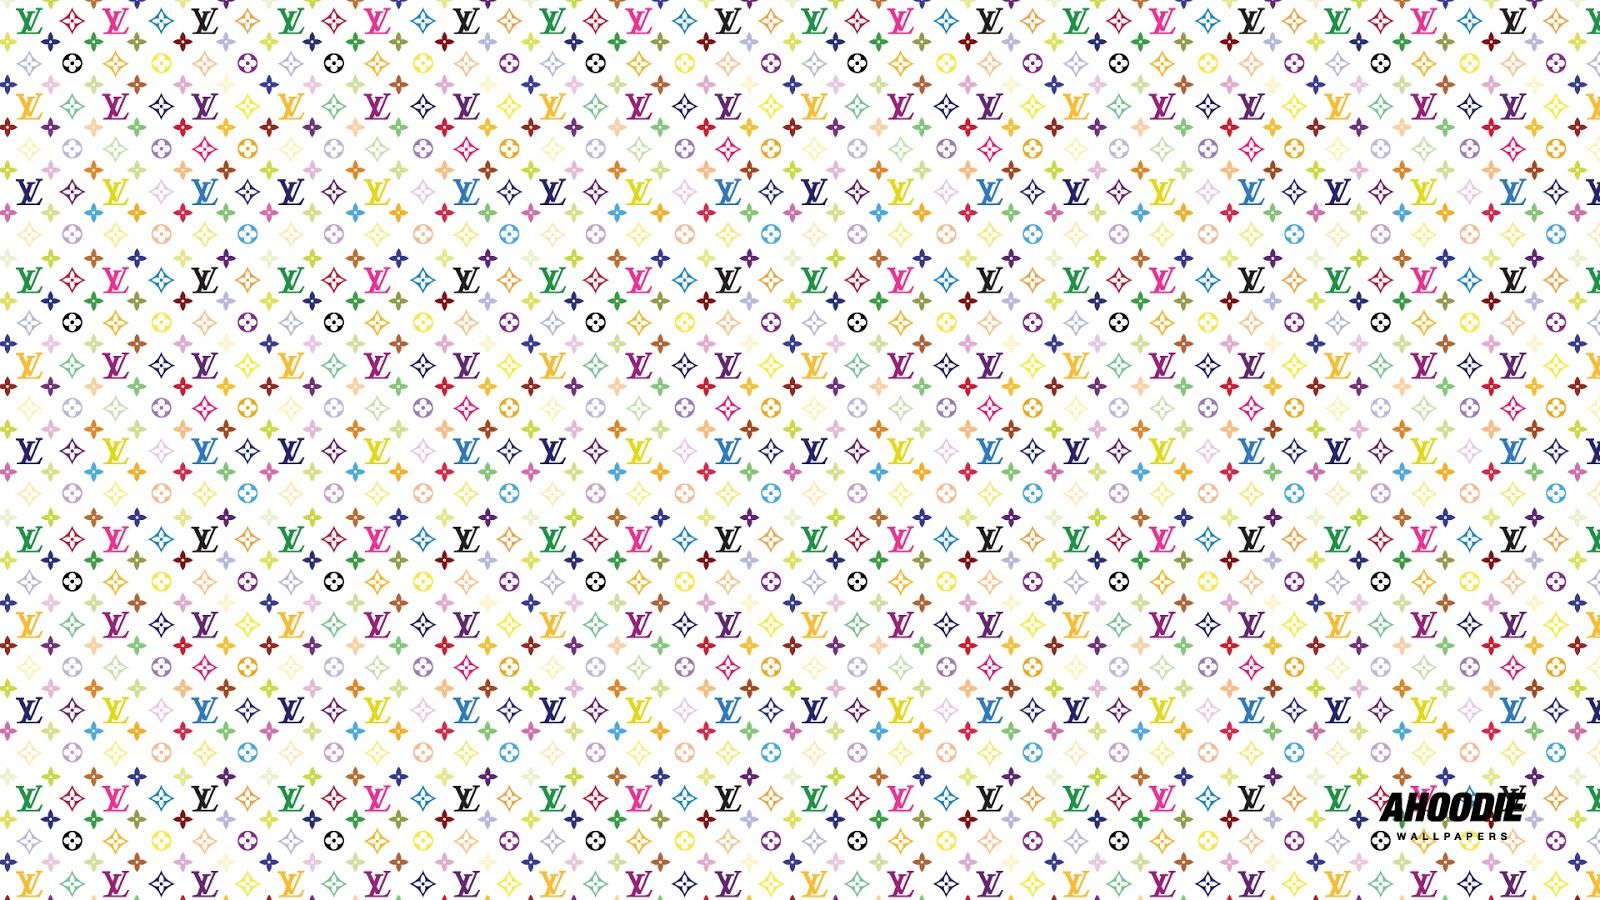 Louis Vuitton Desktop Wallpapers posted by Ethan Tremblay